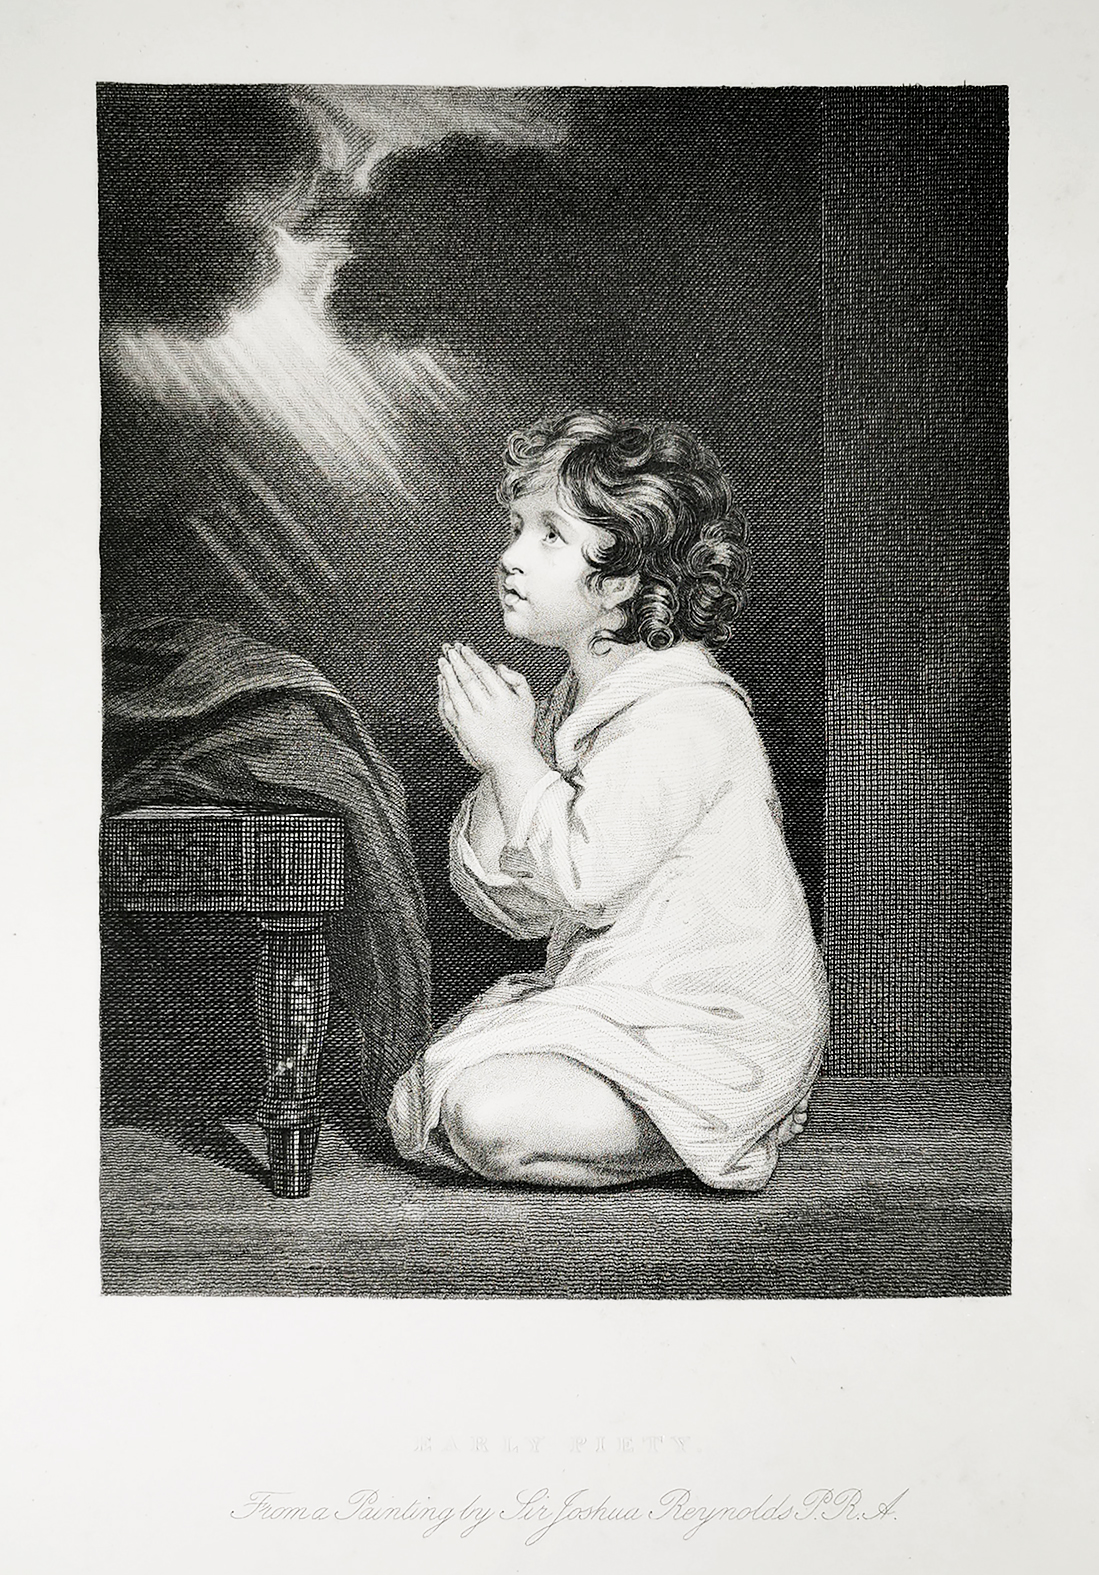 Early Piety. - Antique Print from 1890